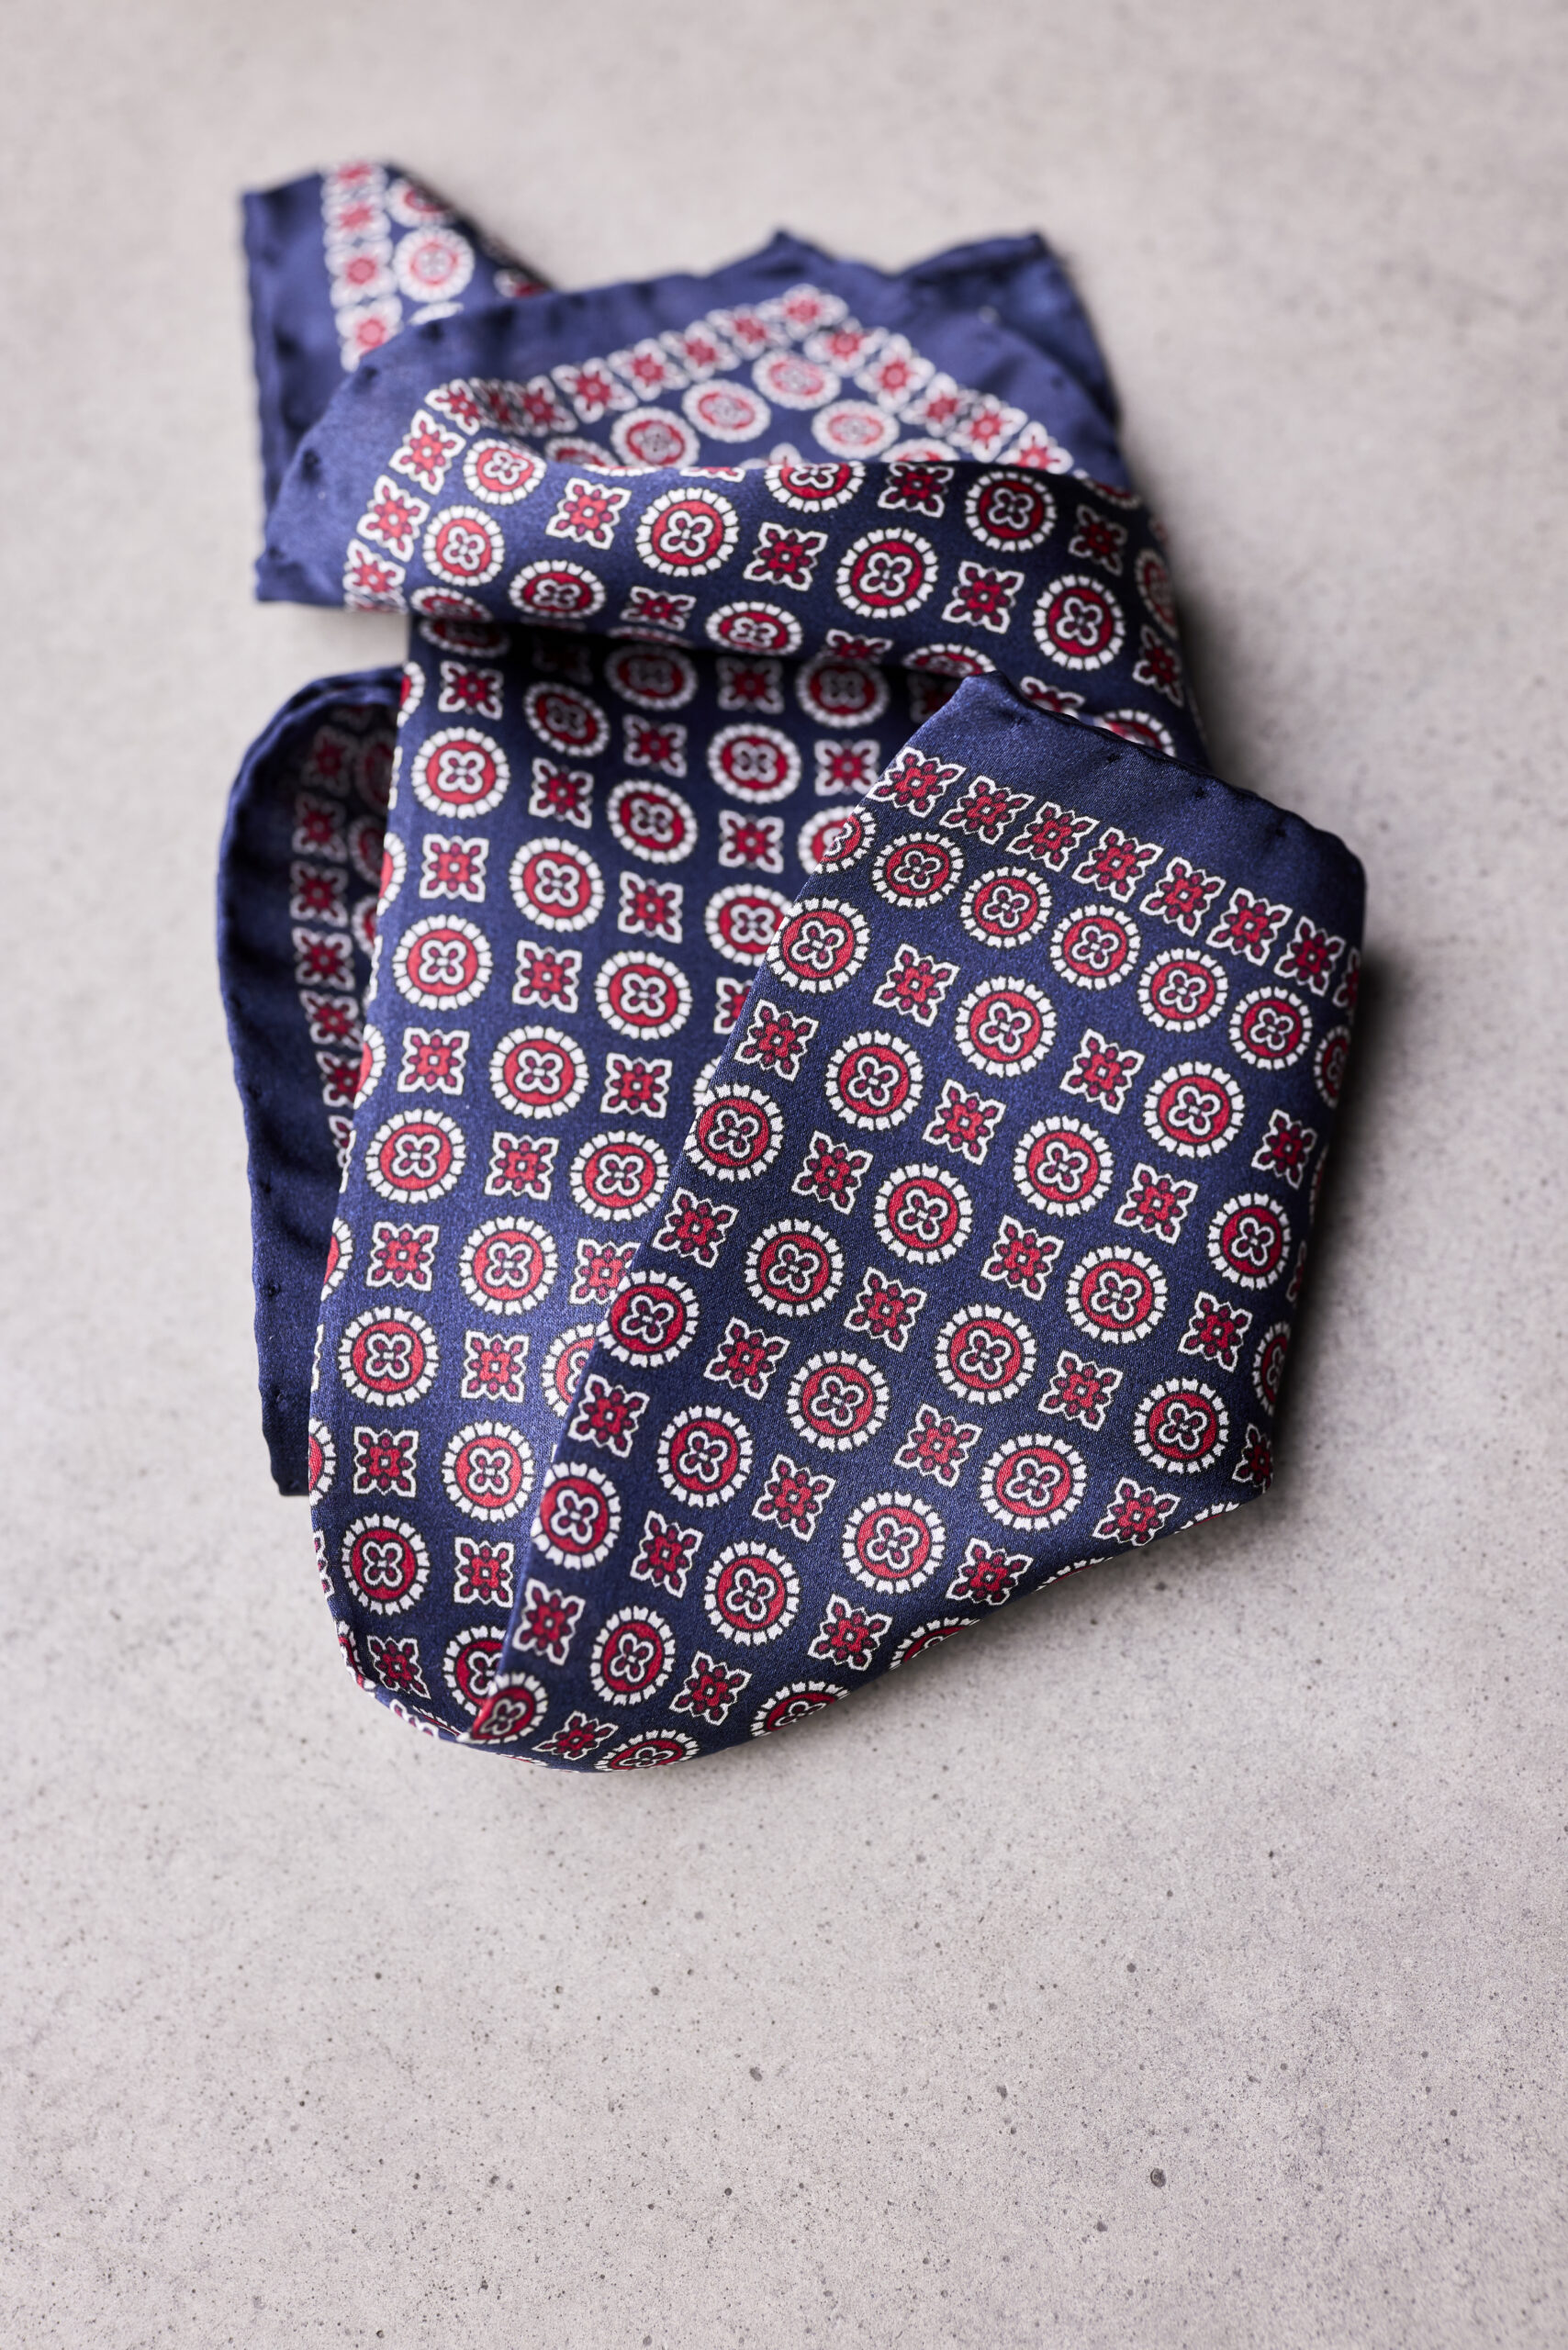 A folded blue and red tie on top of the floor.